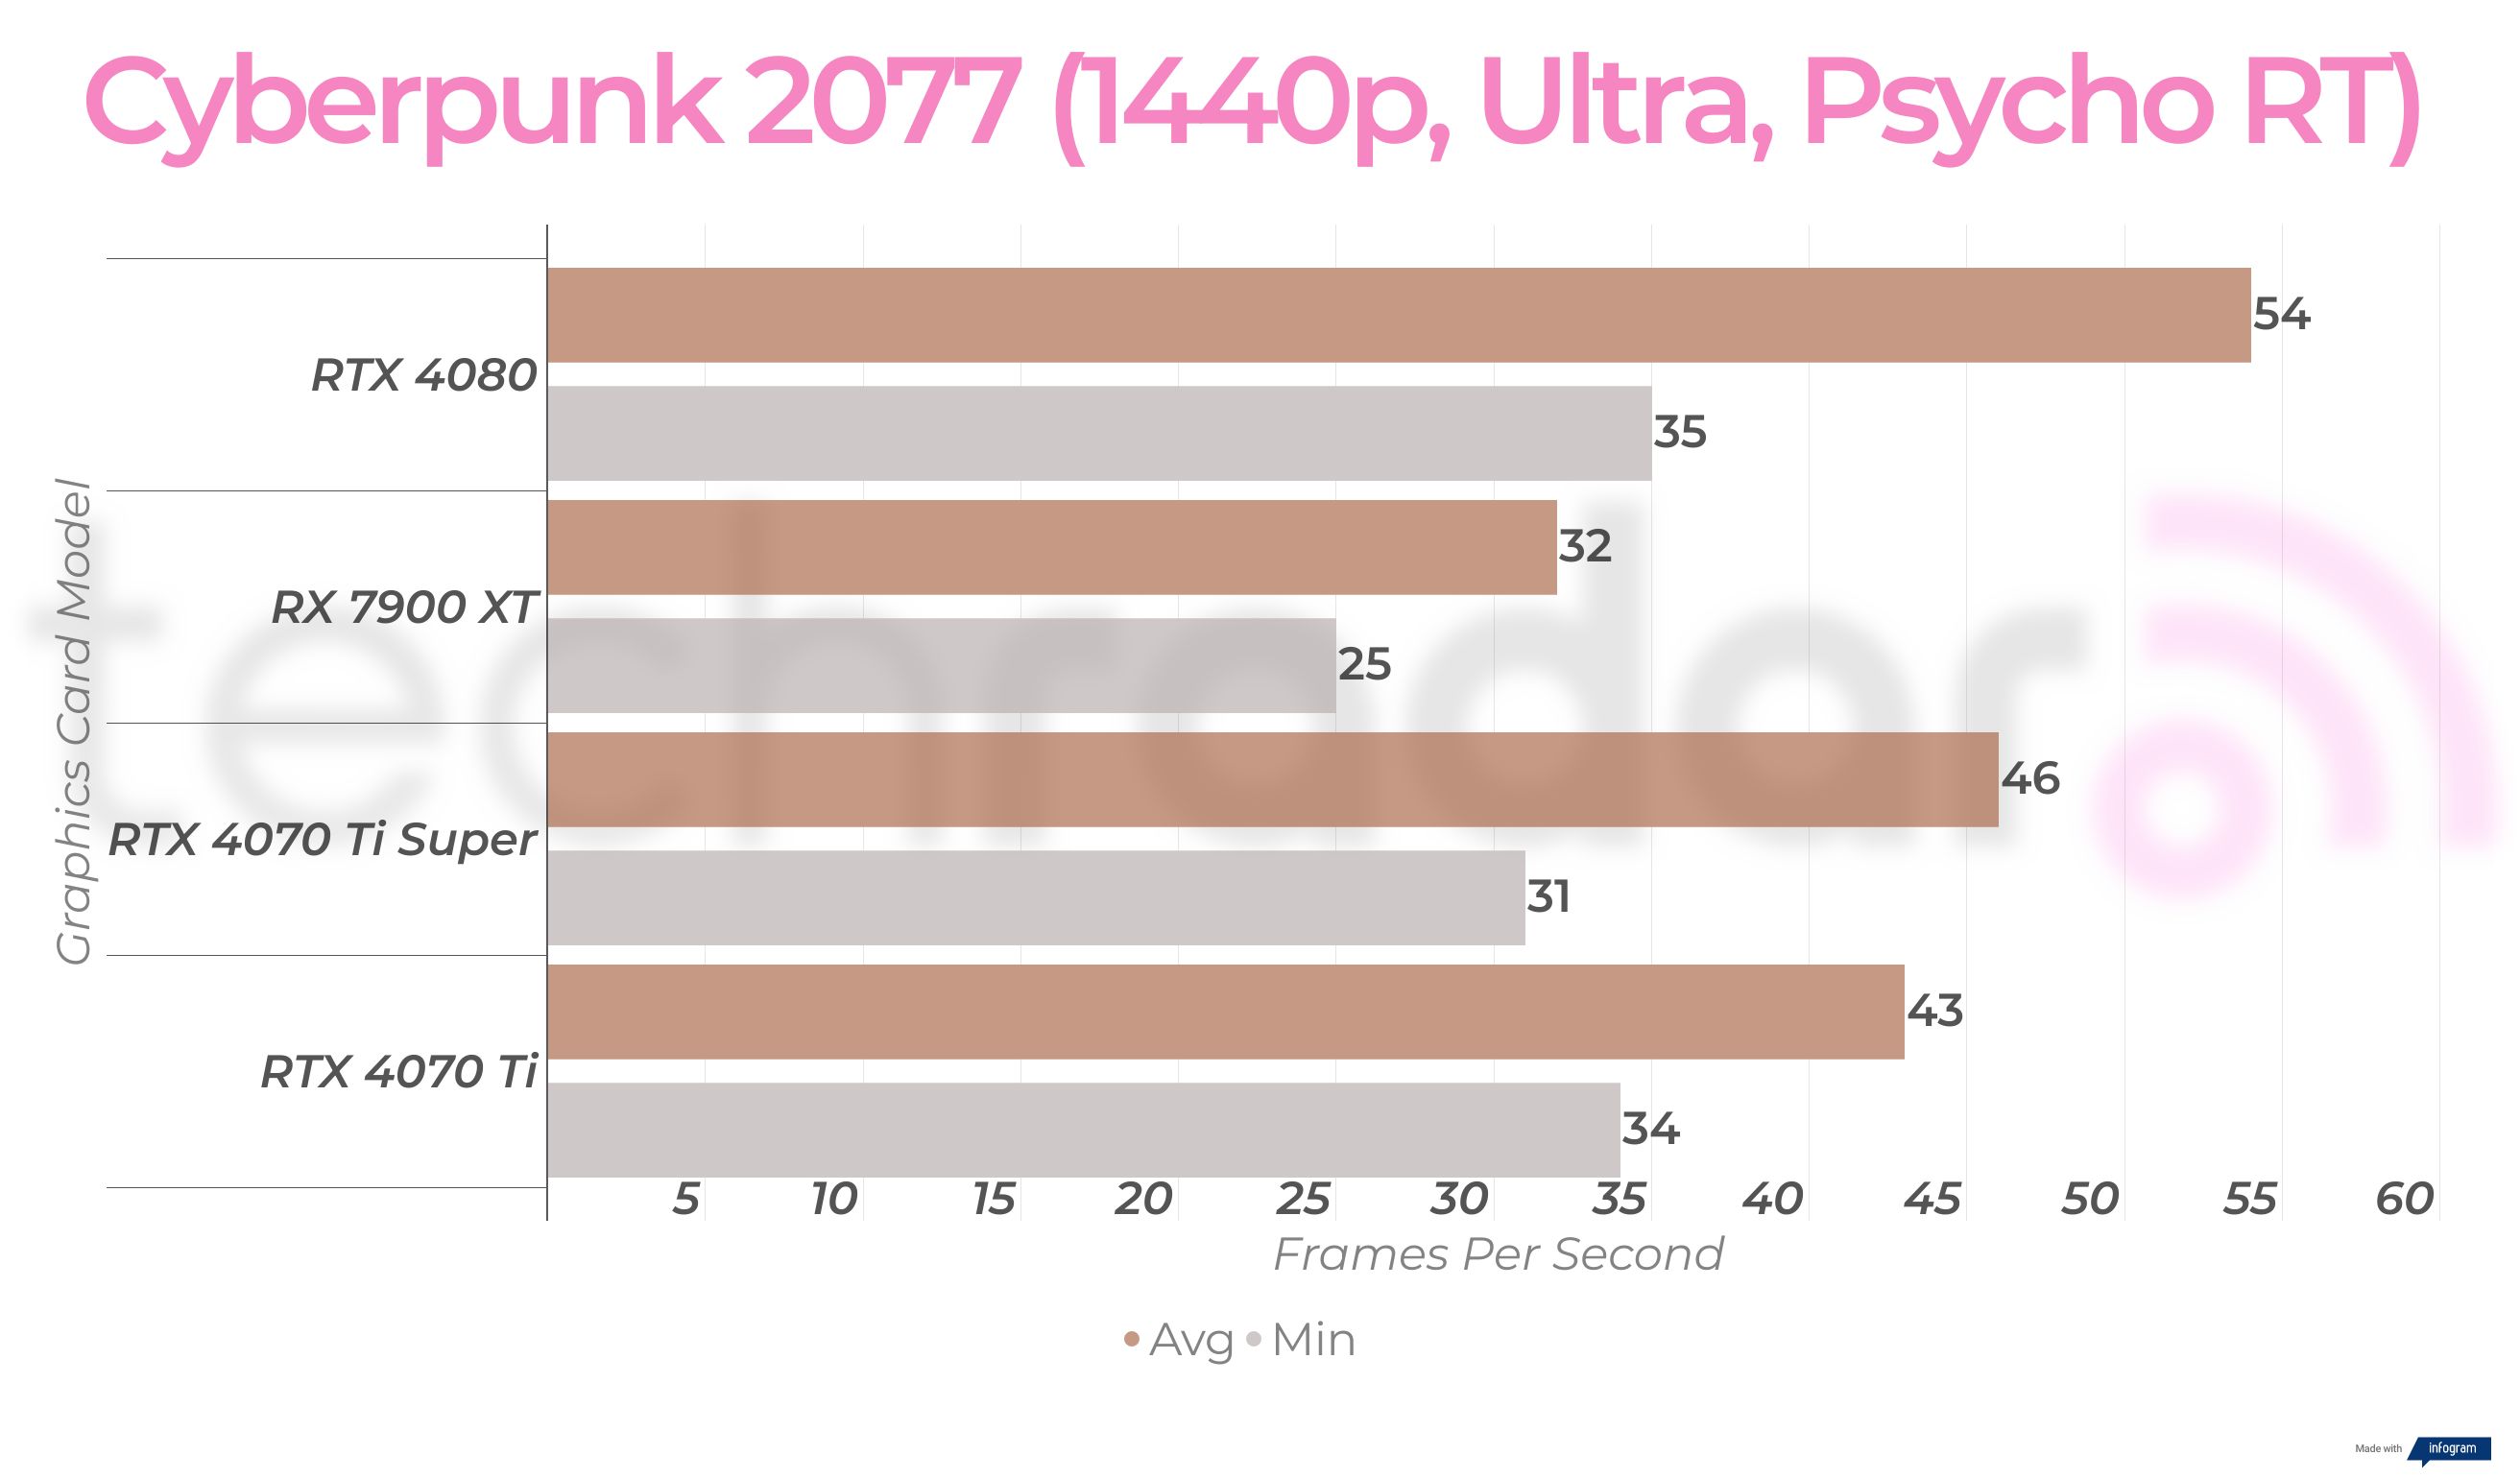 1440p gaming benchmarks for the RTX 4070 Ti Super